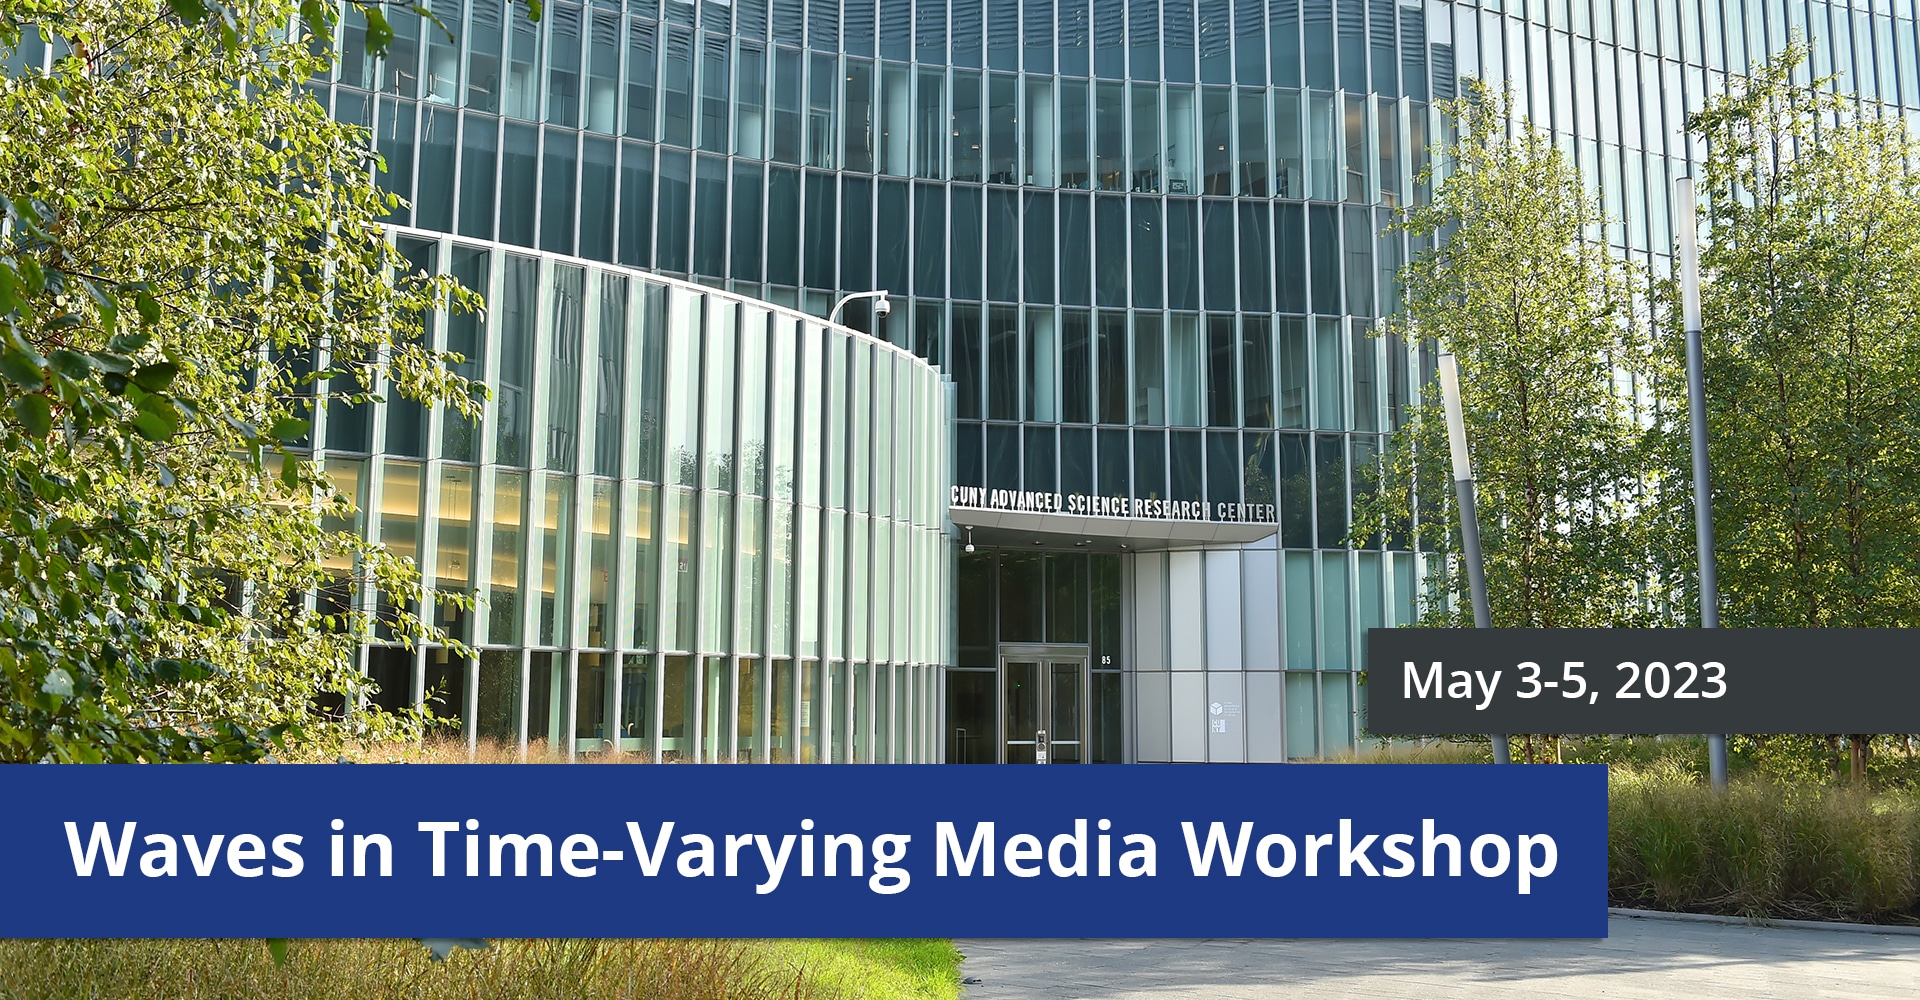 Banner image of the exterior of the ASRC building with title text overlaid "Waves in Time-Varying Media Workshop, May 3-5, 2023"